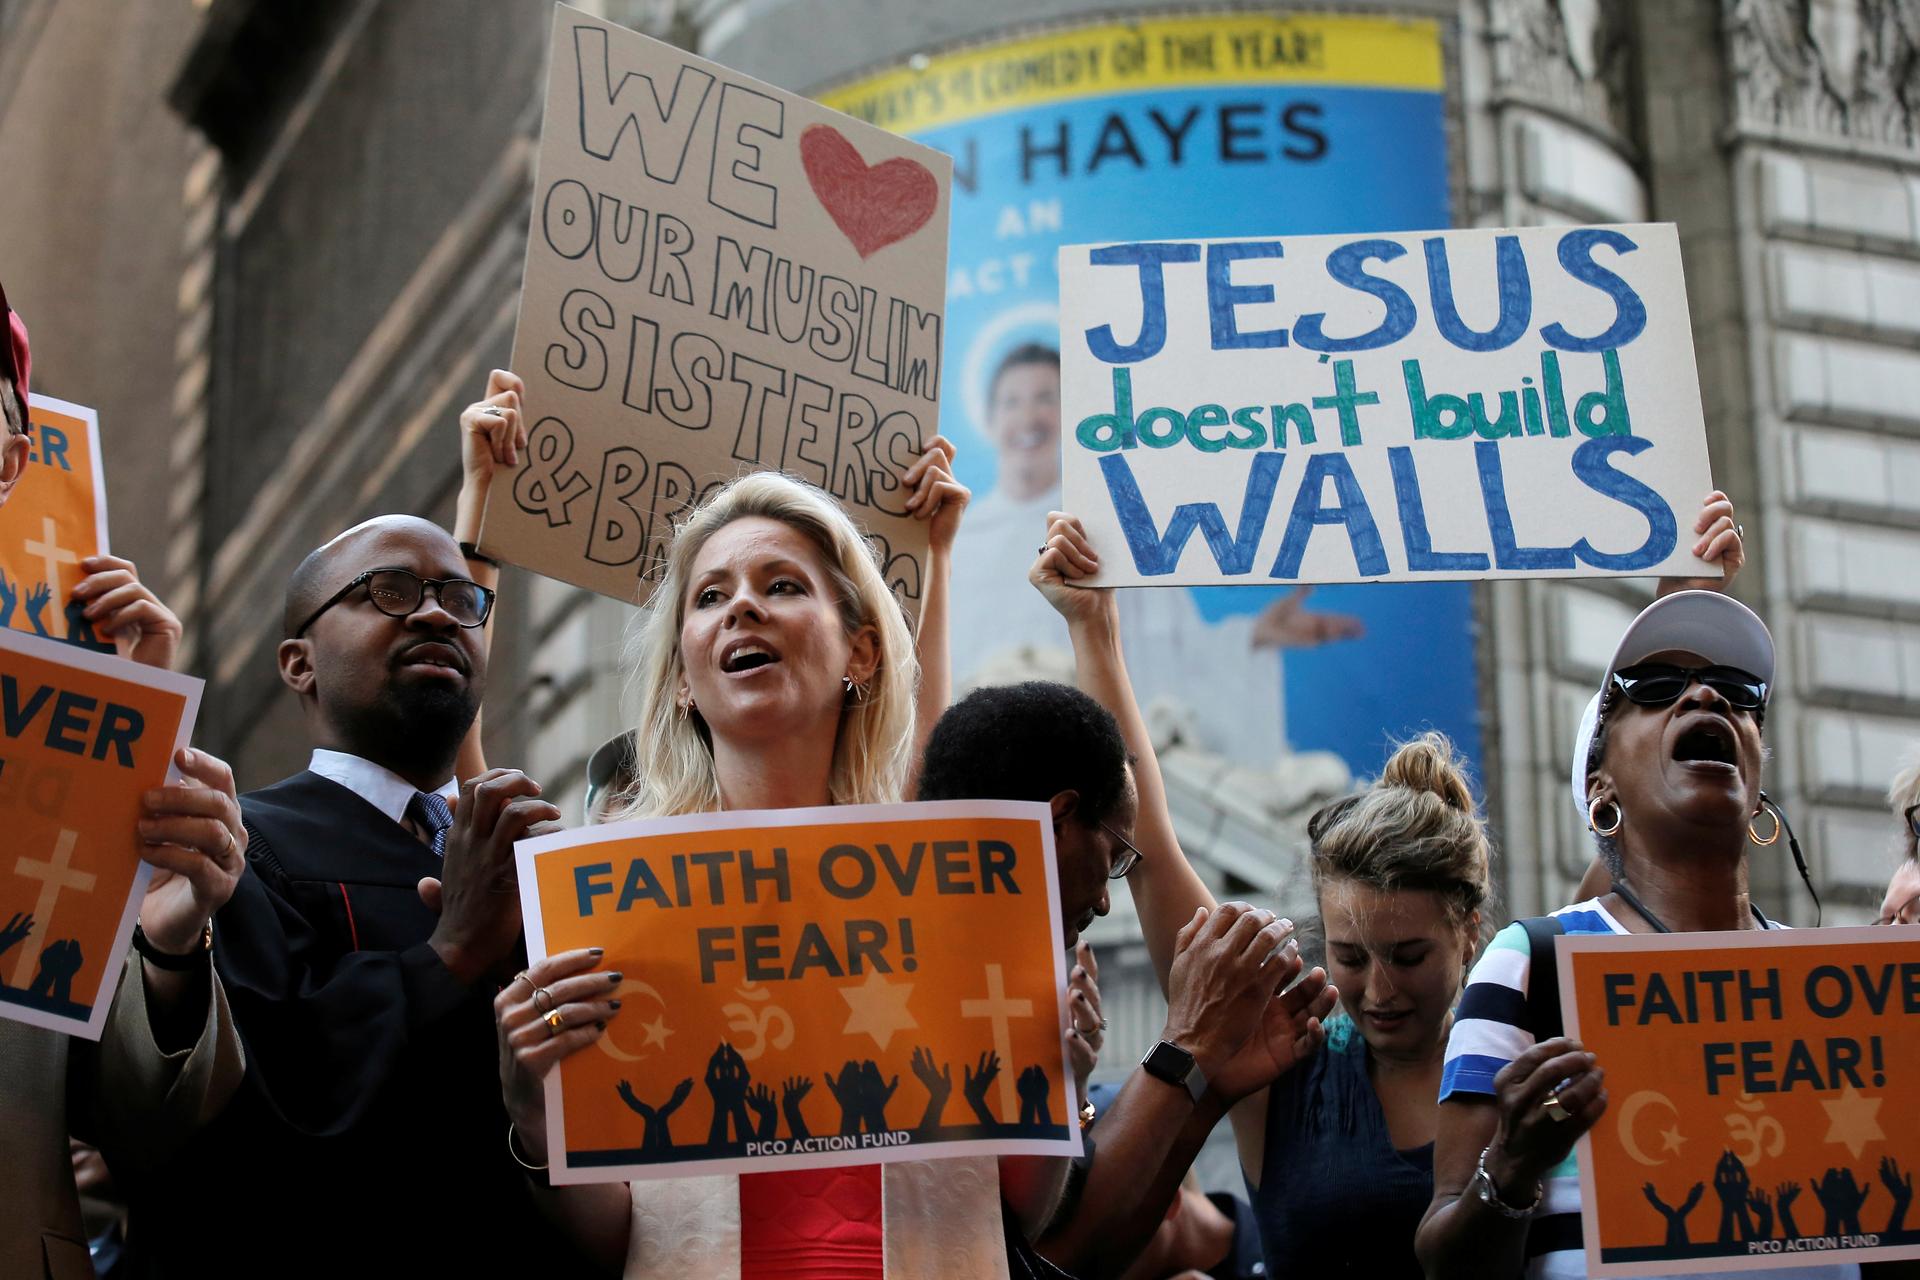 group of protesters, with signs "Jesus doesn't build walls" and "Faith over fear"